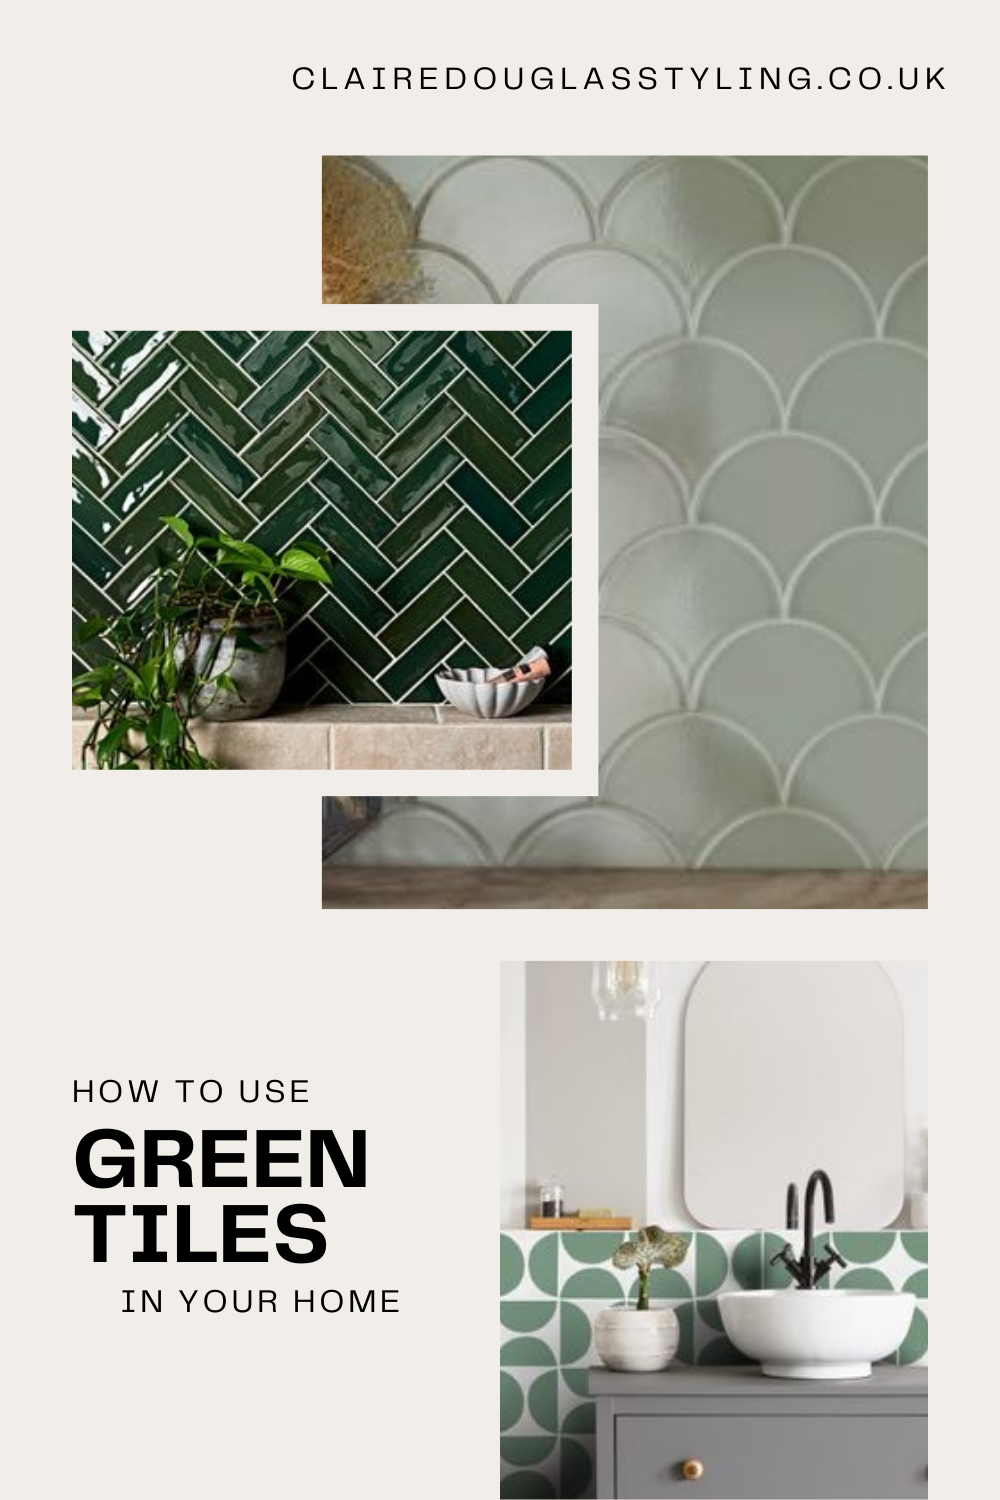 All about tiles